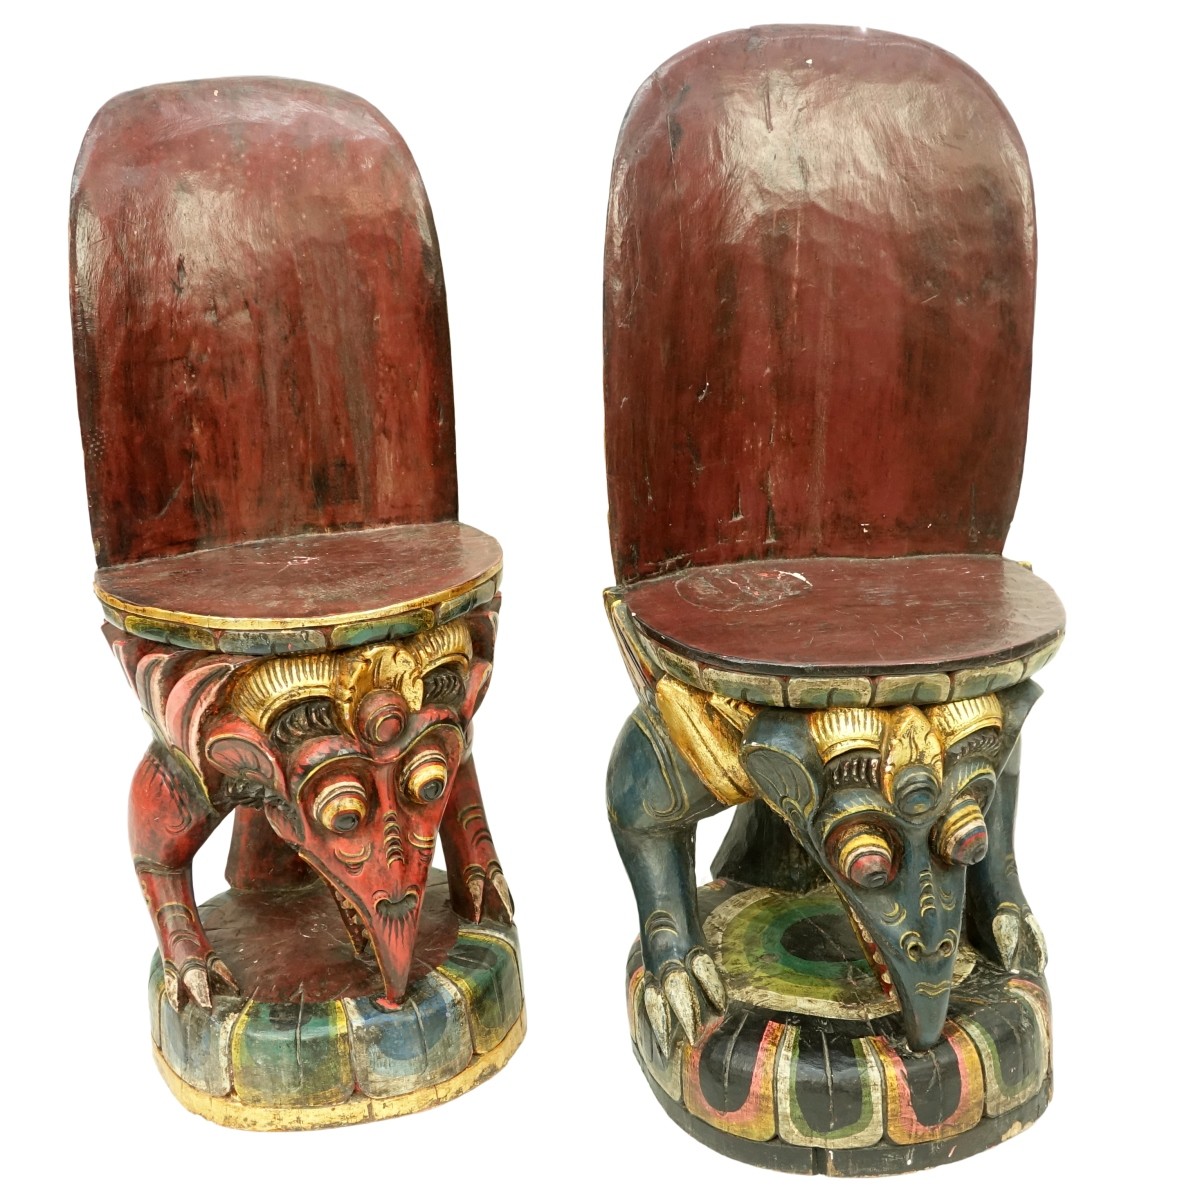 Pair of Balinese Polychrome Lacquered Chairs